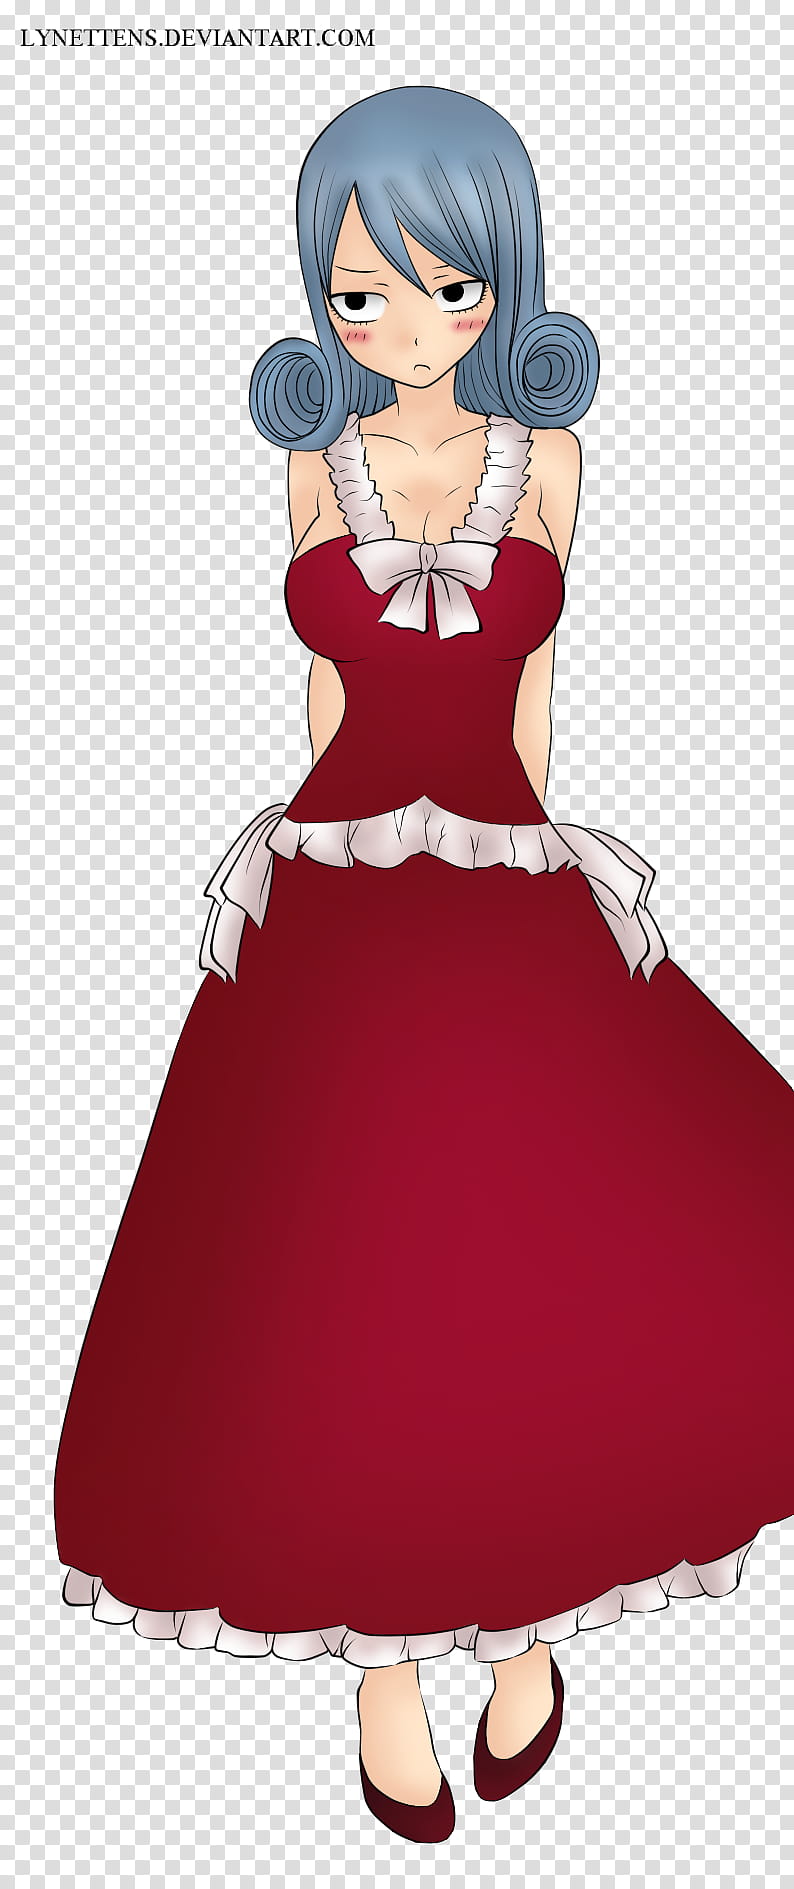 Juvia with Mirajane clothes FT Omake, blue-haired female anime character wearing red and white dress transparent background PNG clipart